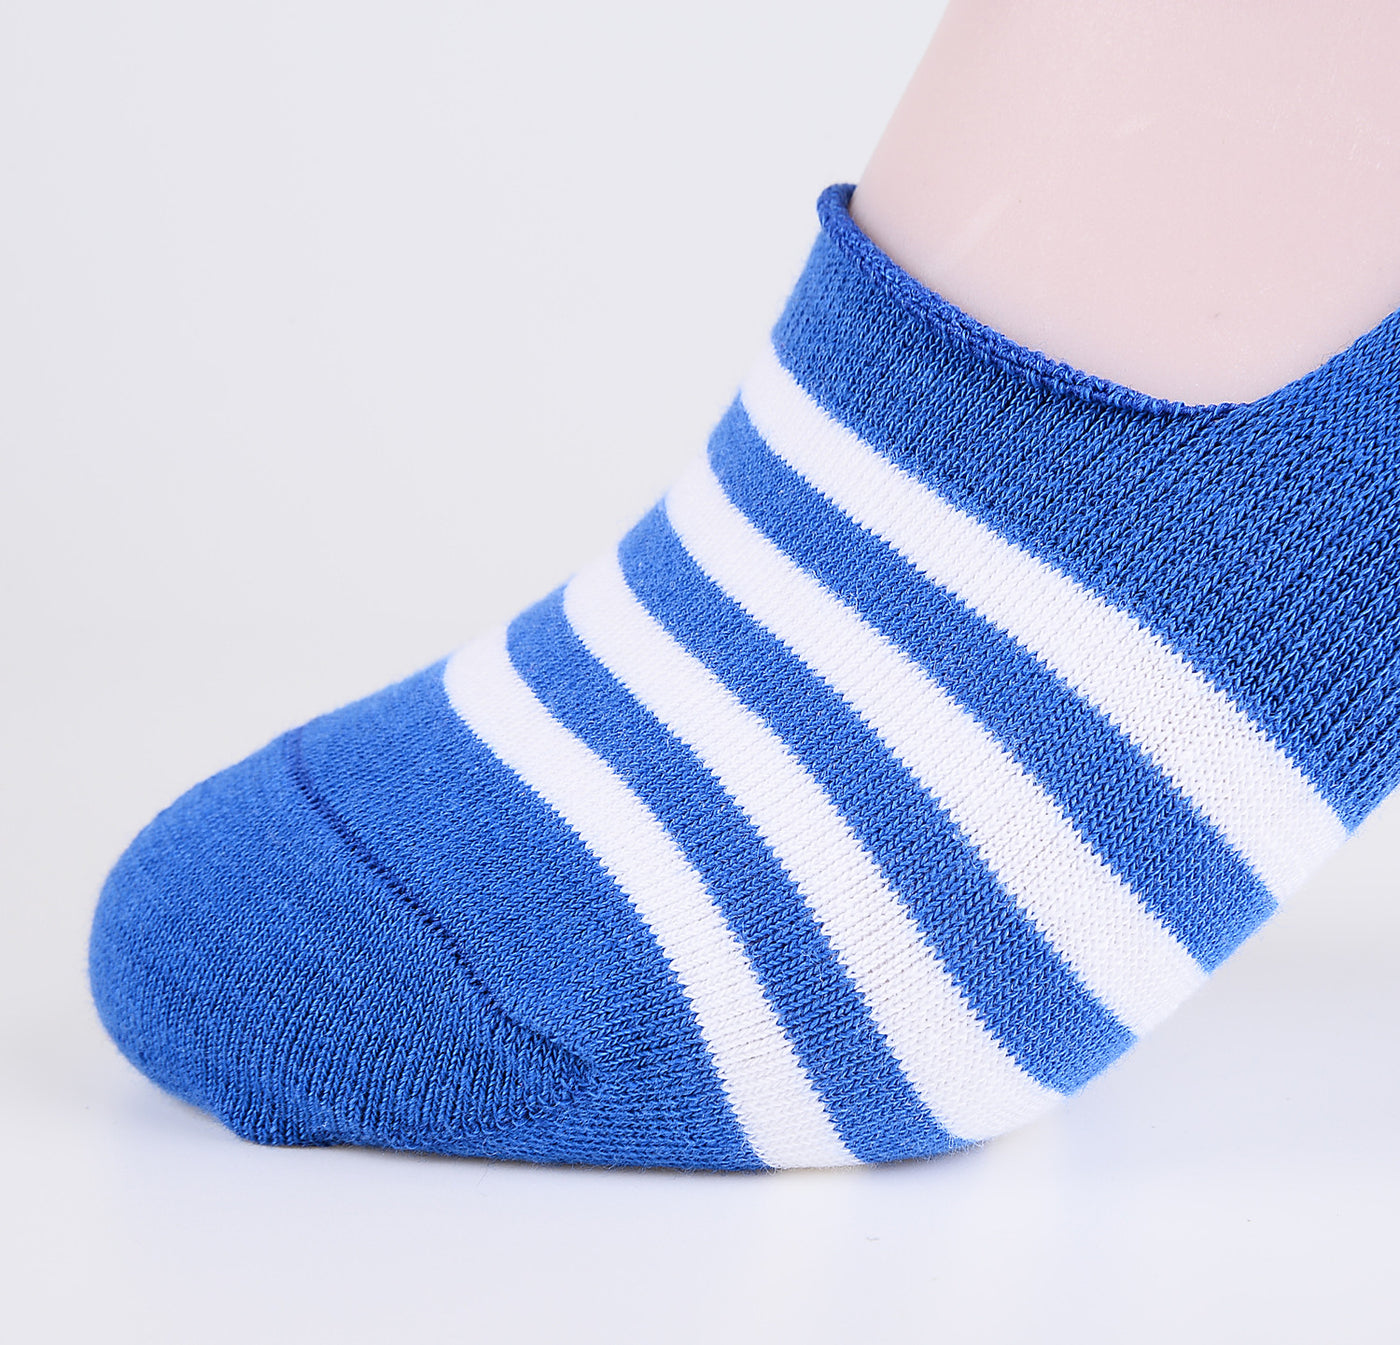 2 Pairs Finest Combed Cotton Invisible Socks Striped Blue